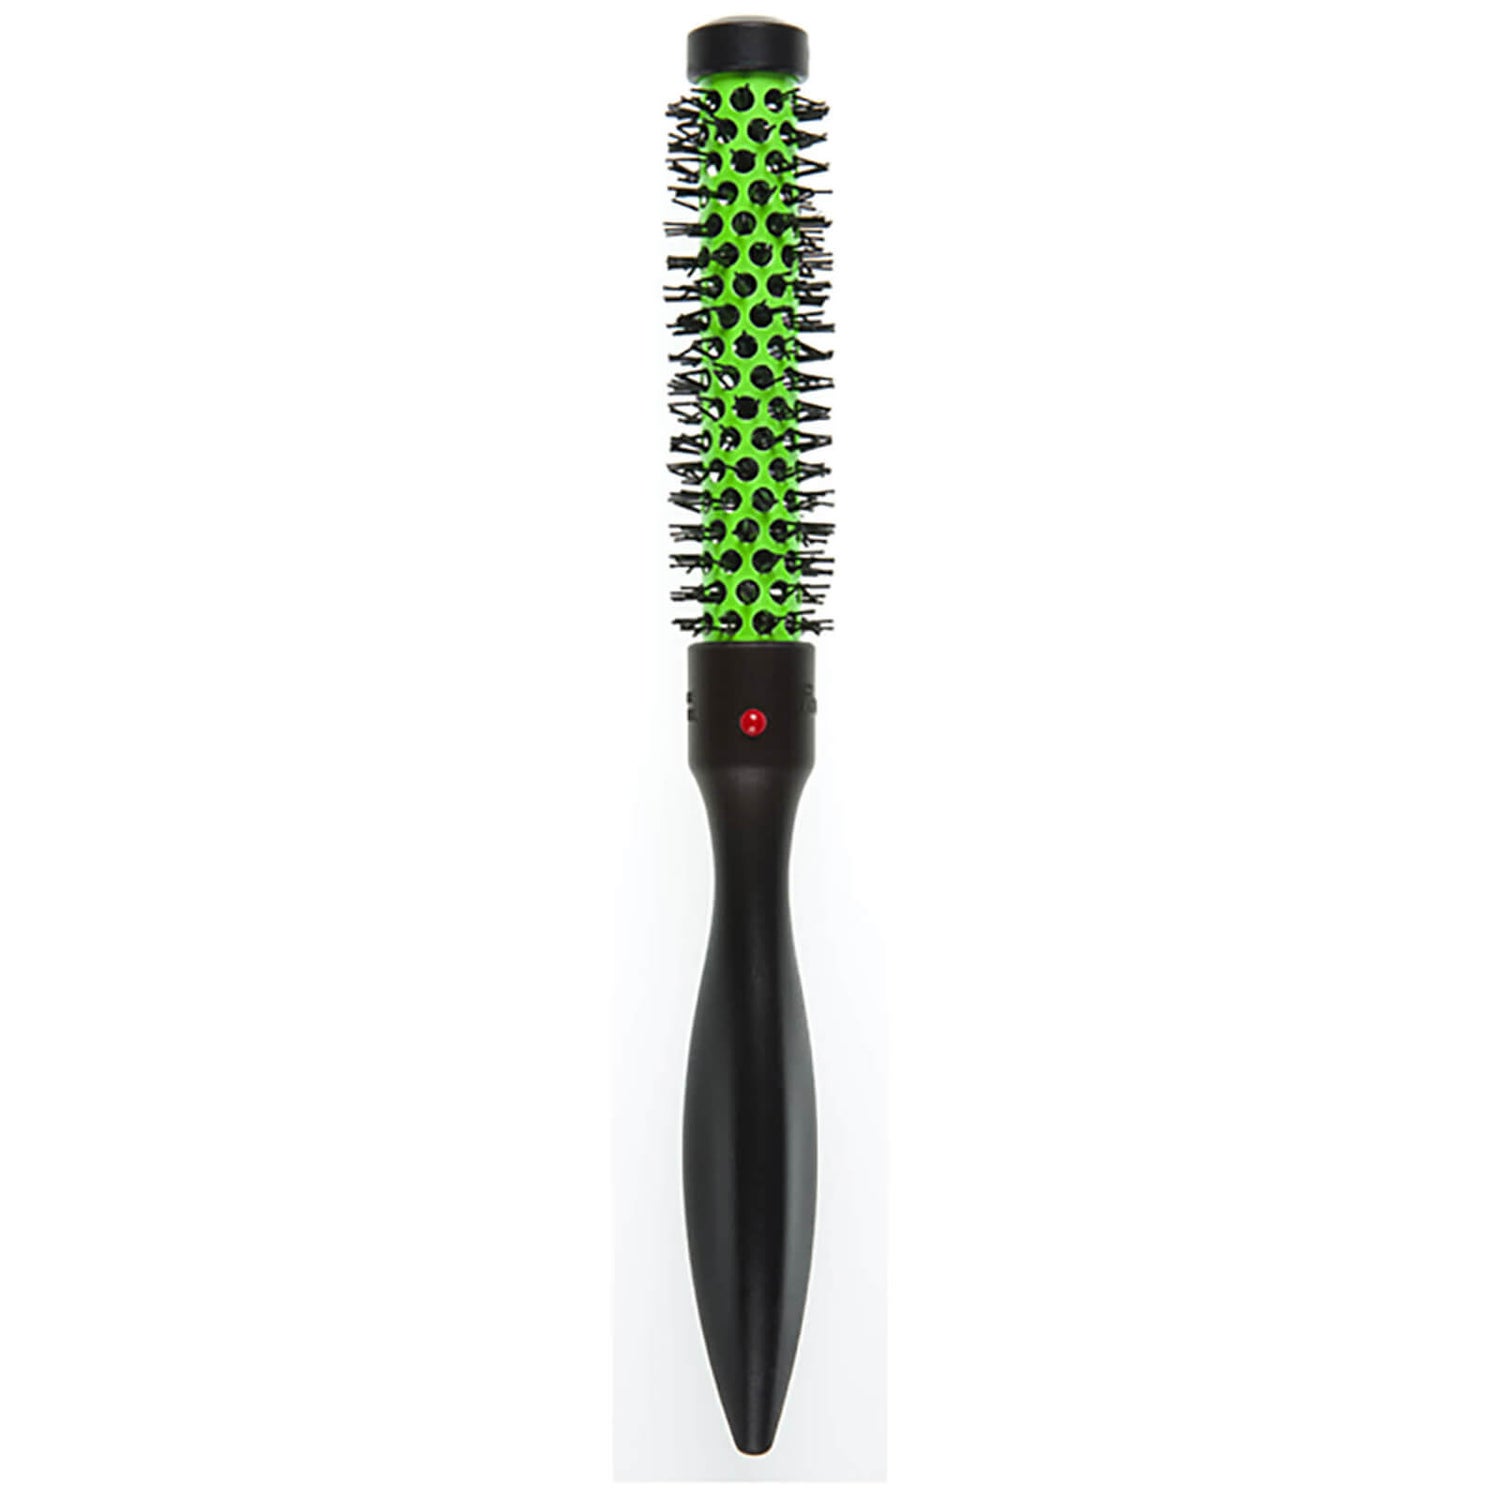 Denman D70 Extra Small ThermoCeramic Curling Brush - Neon Green